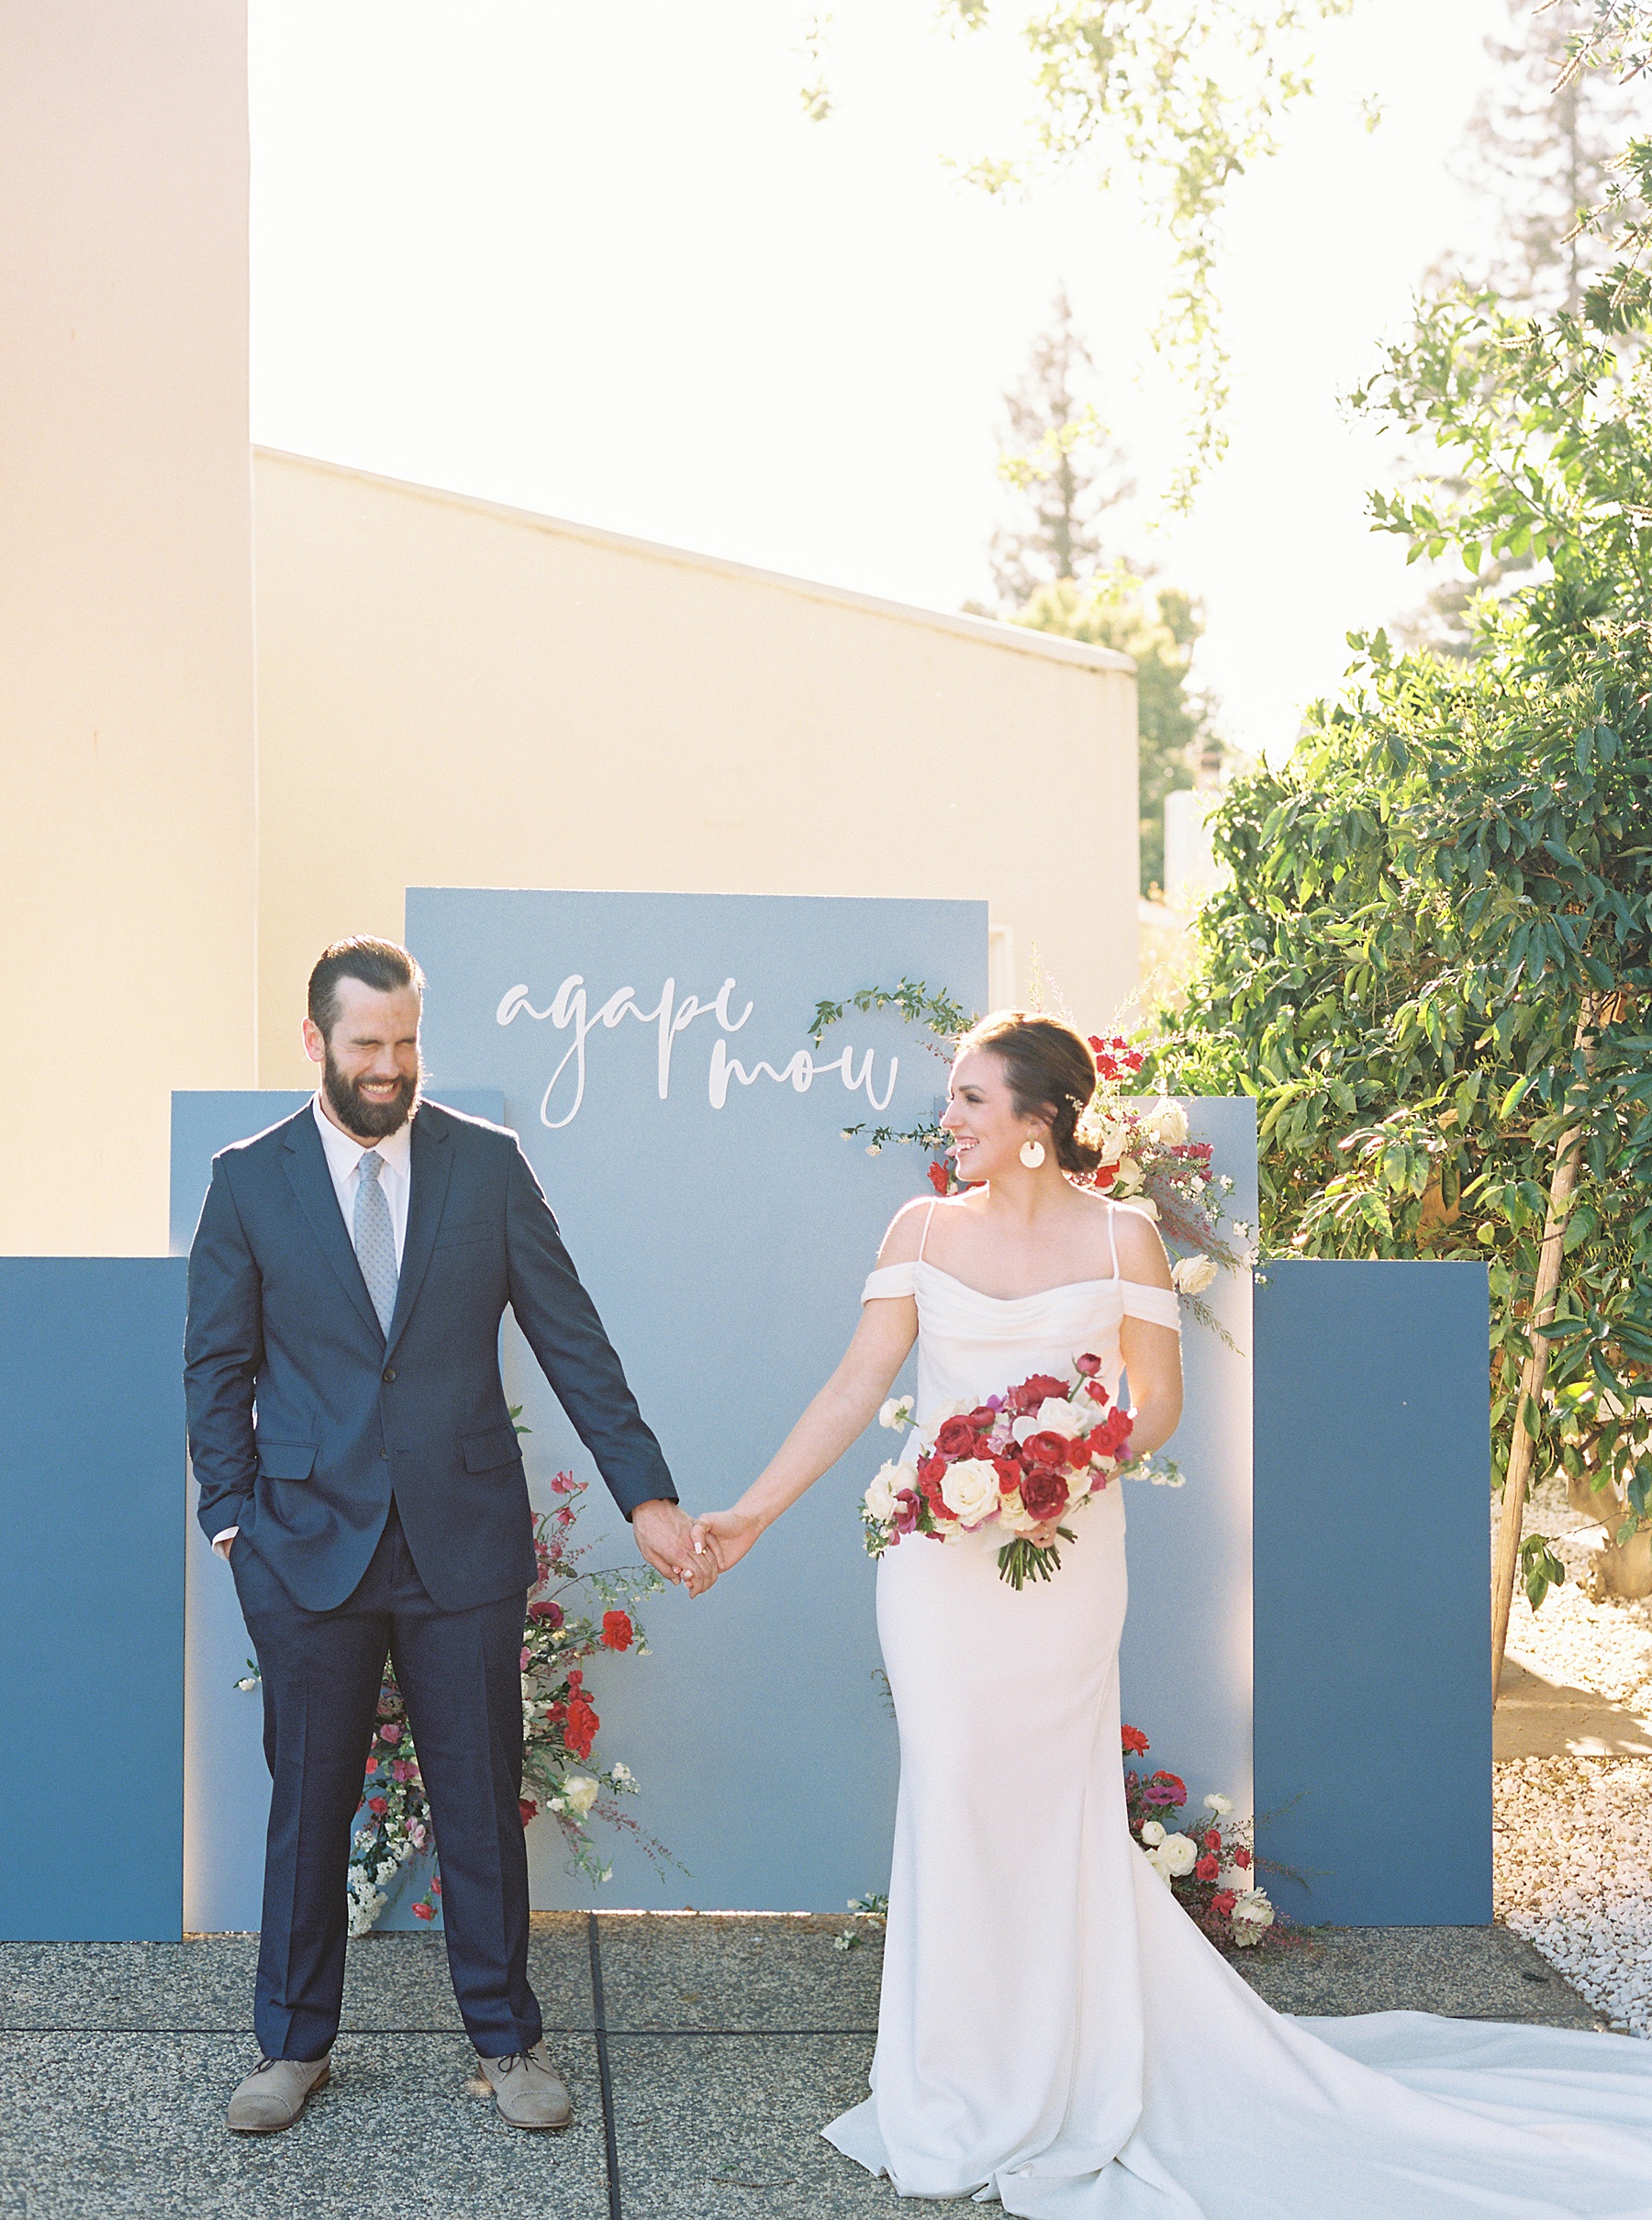 Grecian Inspired Micro-Wedding with Events by Kristina Elyse - Ash Baumgartner - Inspired by This - Sonoma Wedding Photographer_0016.jpg